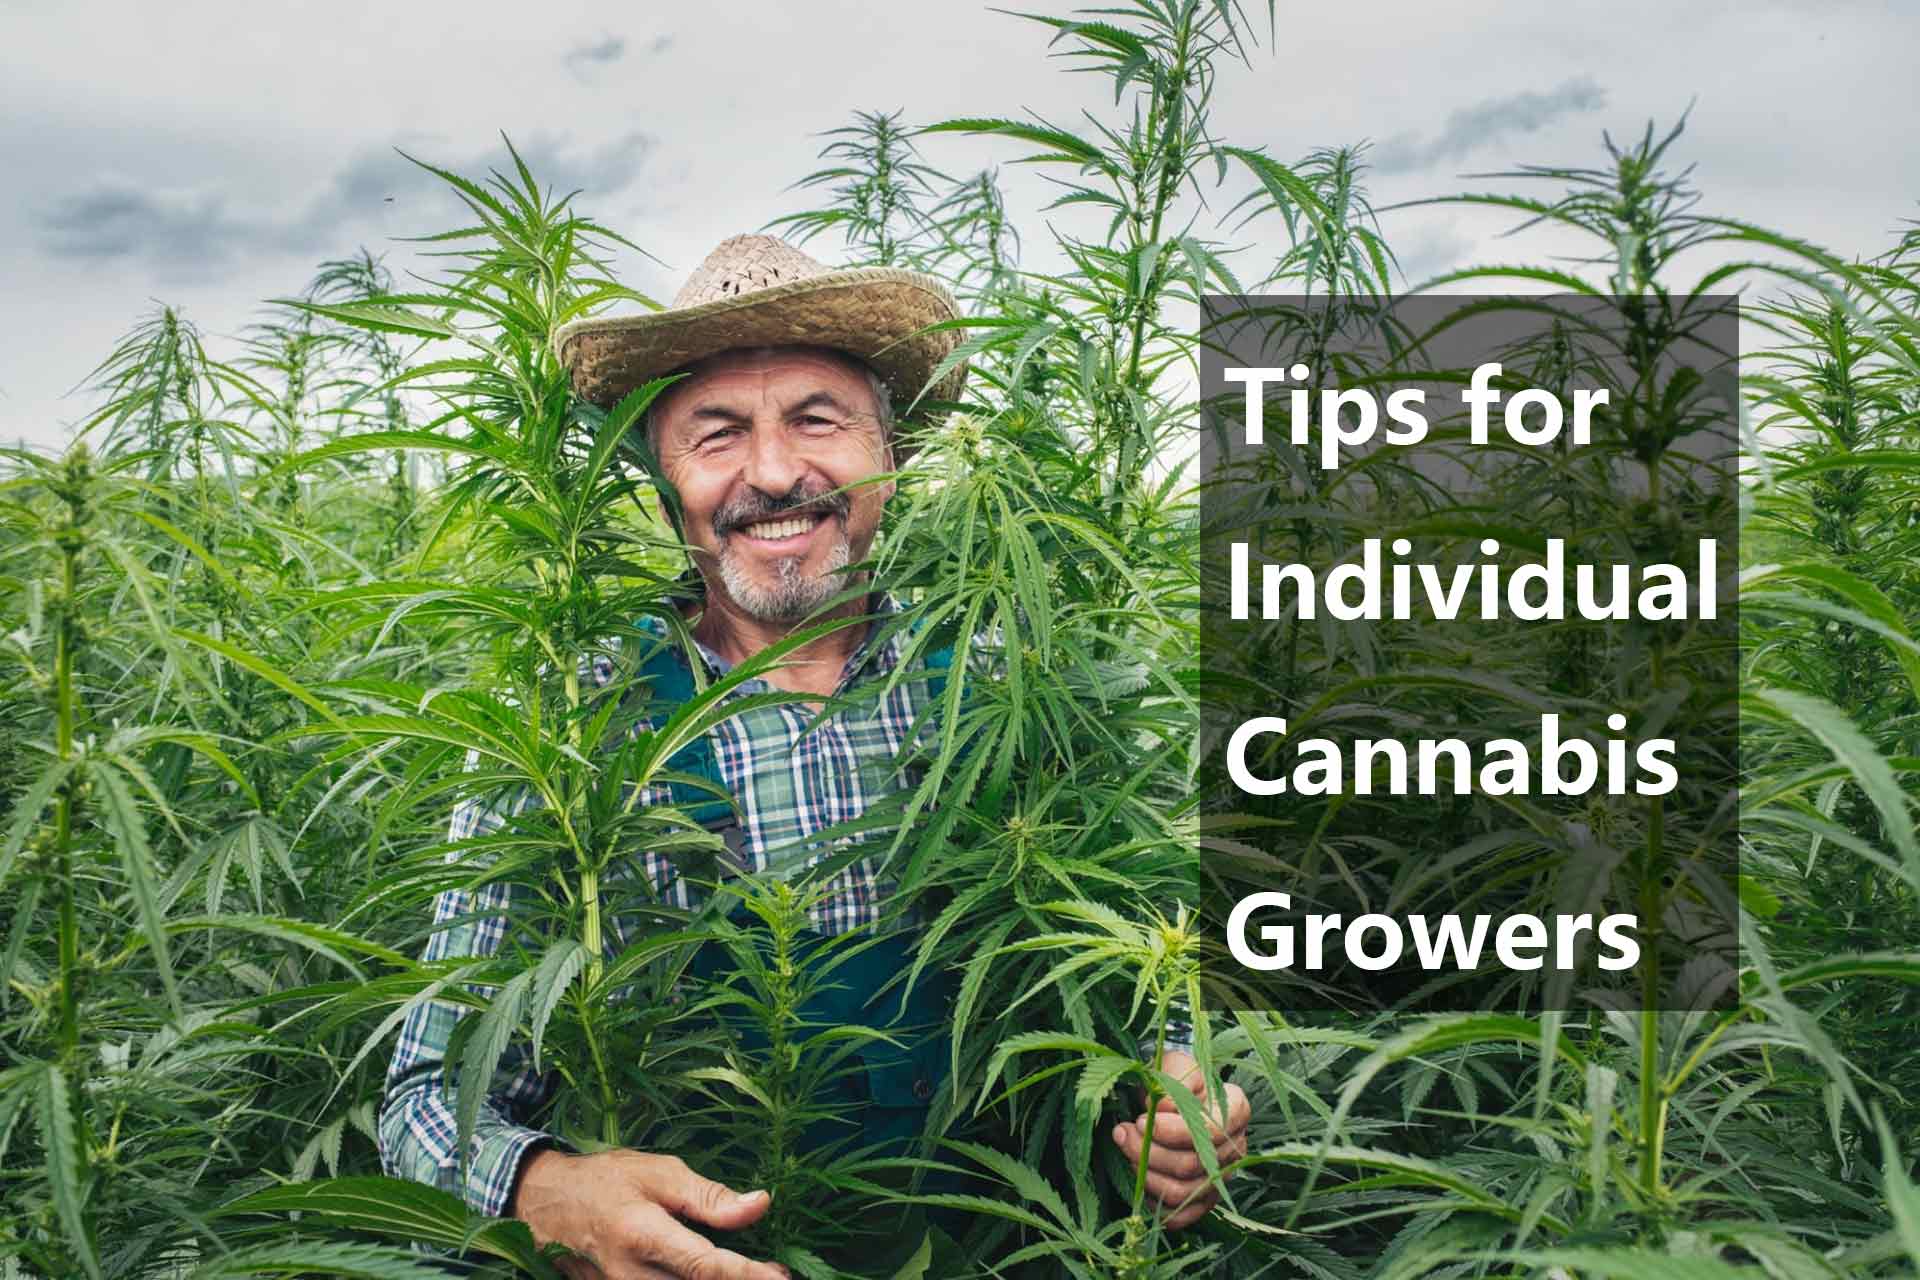 Tips for Individual Cannabis Growers